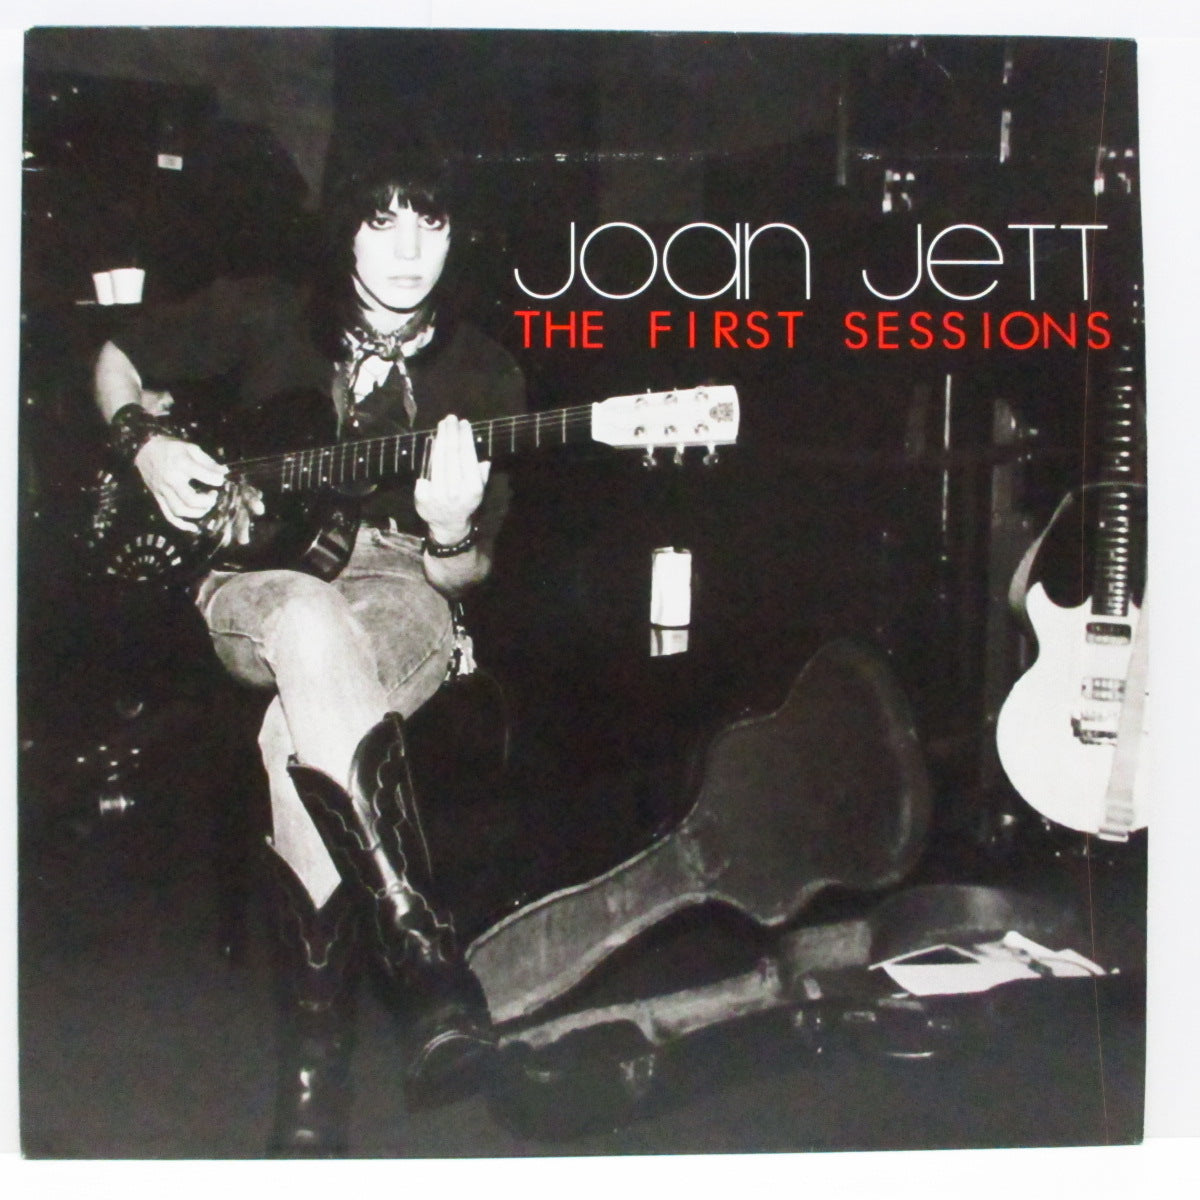 JOAN JETT  (ジョーン・ジェット)  - The First Sessions (US '15 レコードストア・デイ4,000枚限定再発「黒/白ヴァイナル」12")